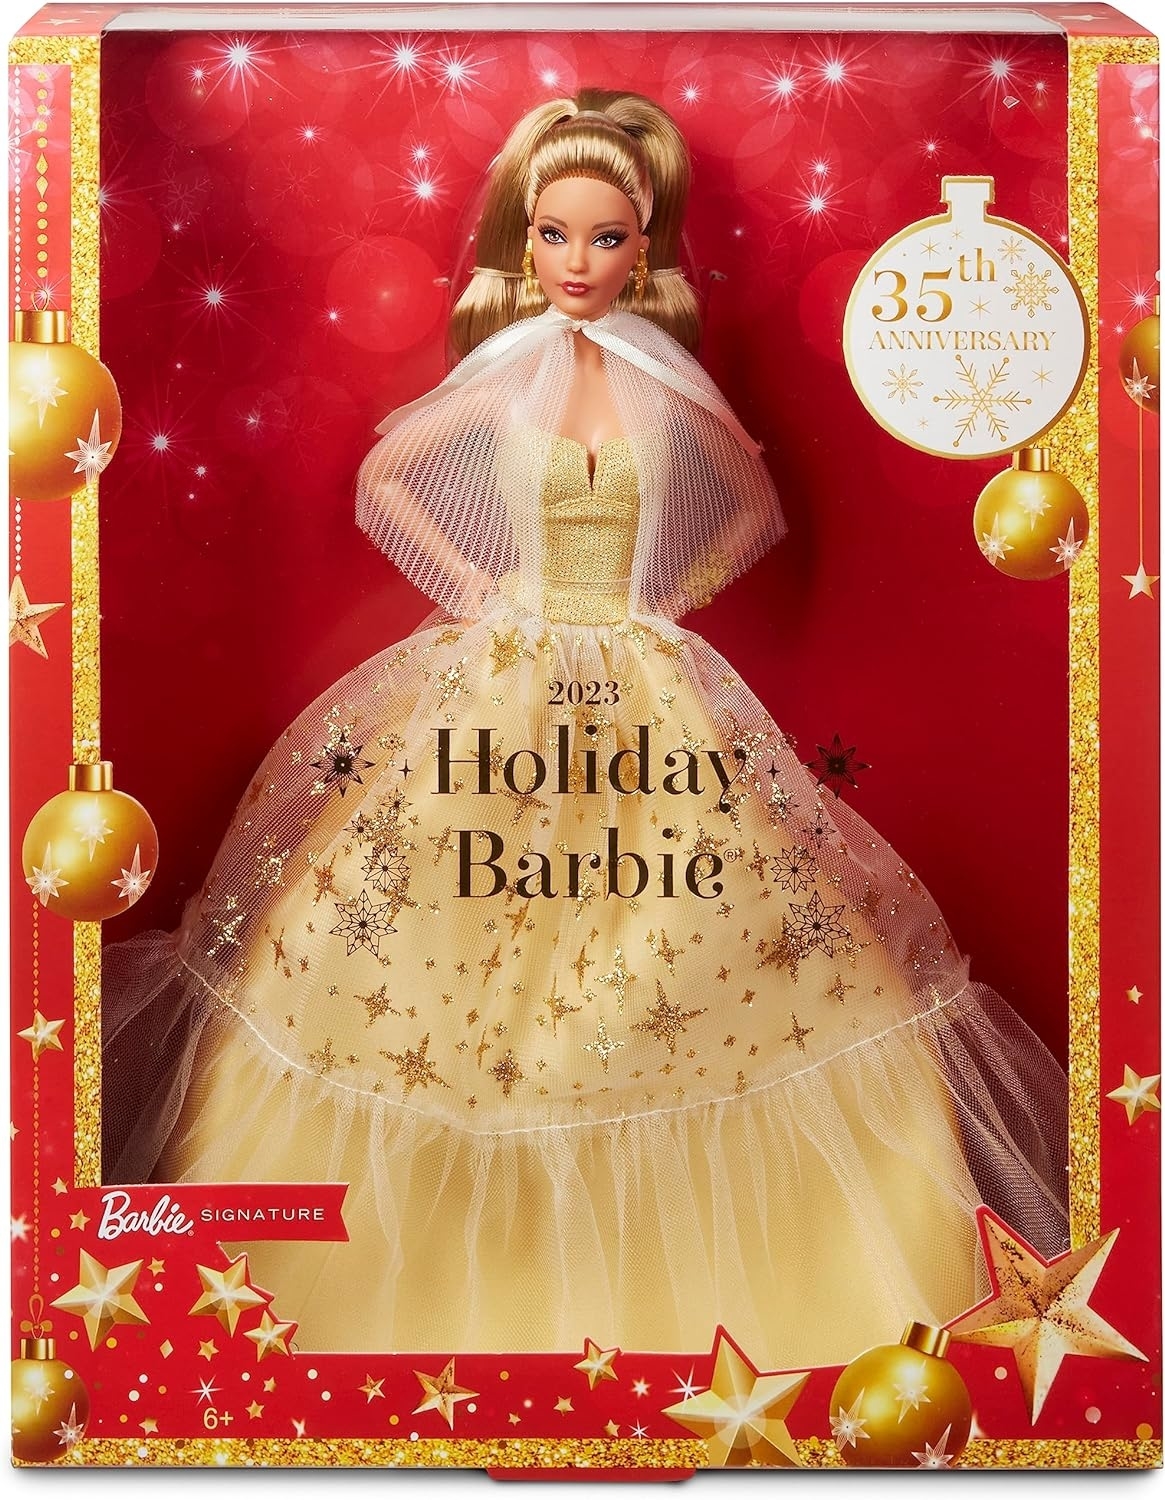 the holiday edition of barbie inside the box